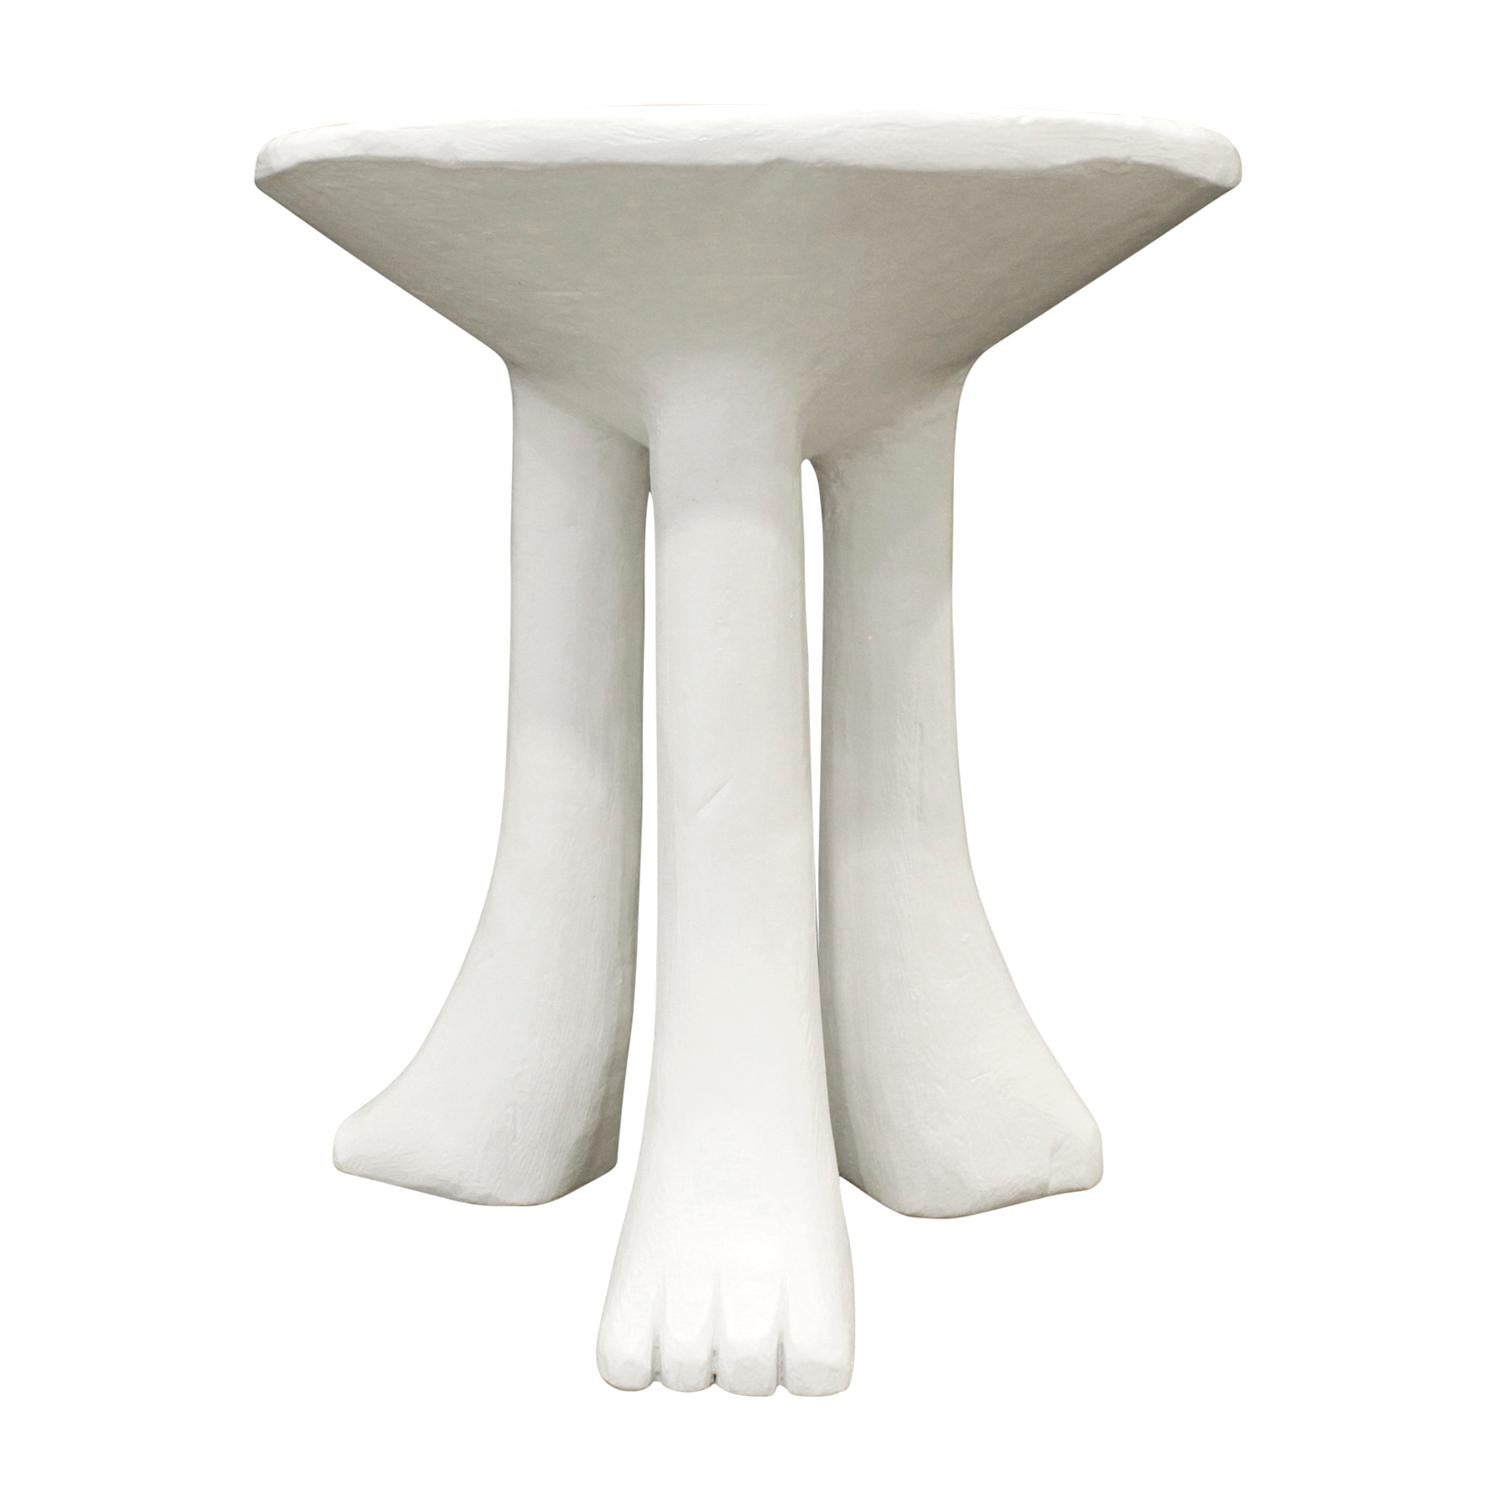 Rare and important 3 legged African end table, model 101-A, in plaster over rebar by John Dickinson, American circa 1980. This is a wonderful example of John Dickinson's iconic design. This piece is shown in the John Dickinson 1970s catalog.